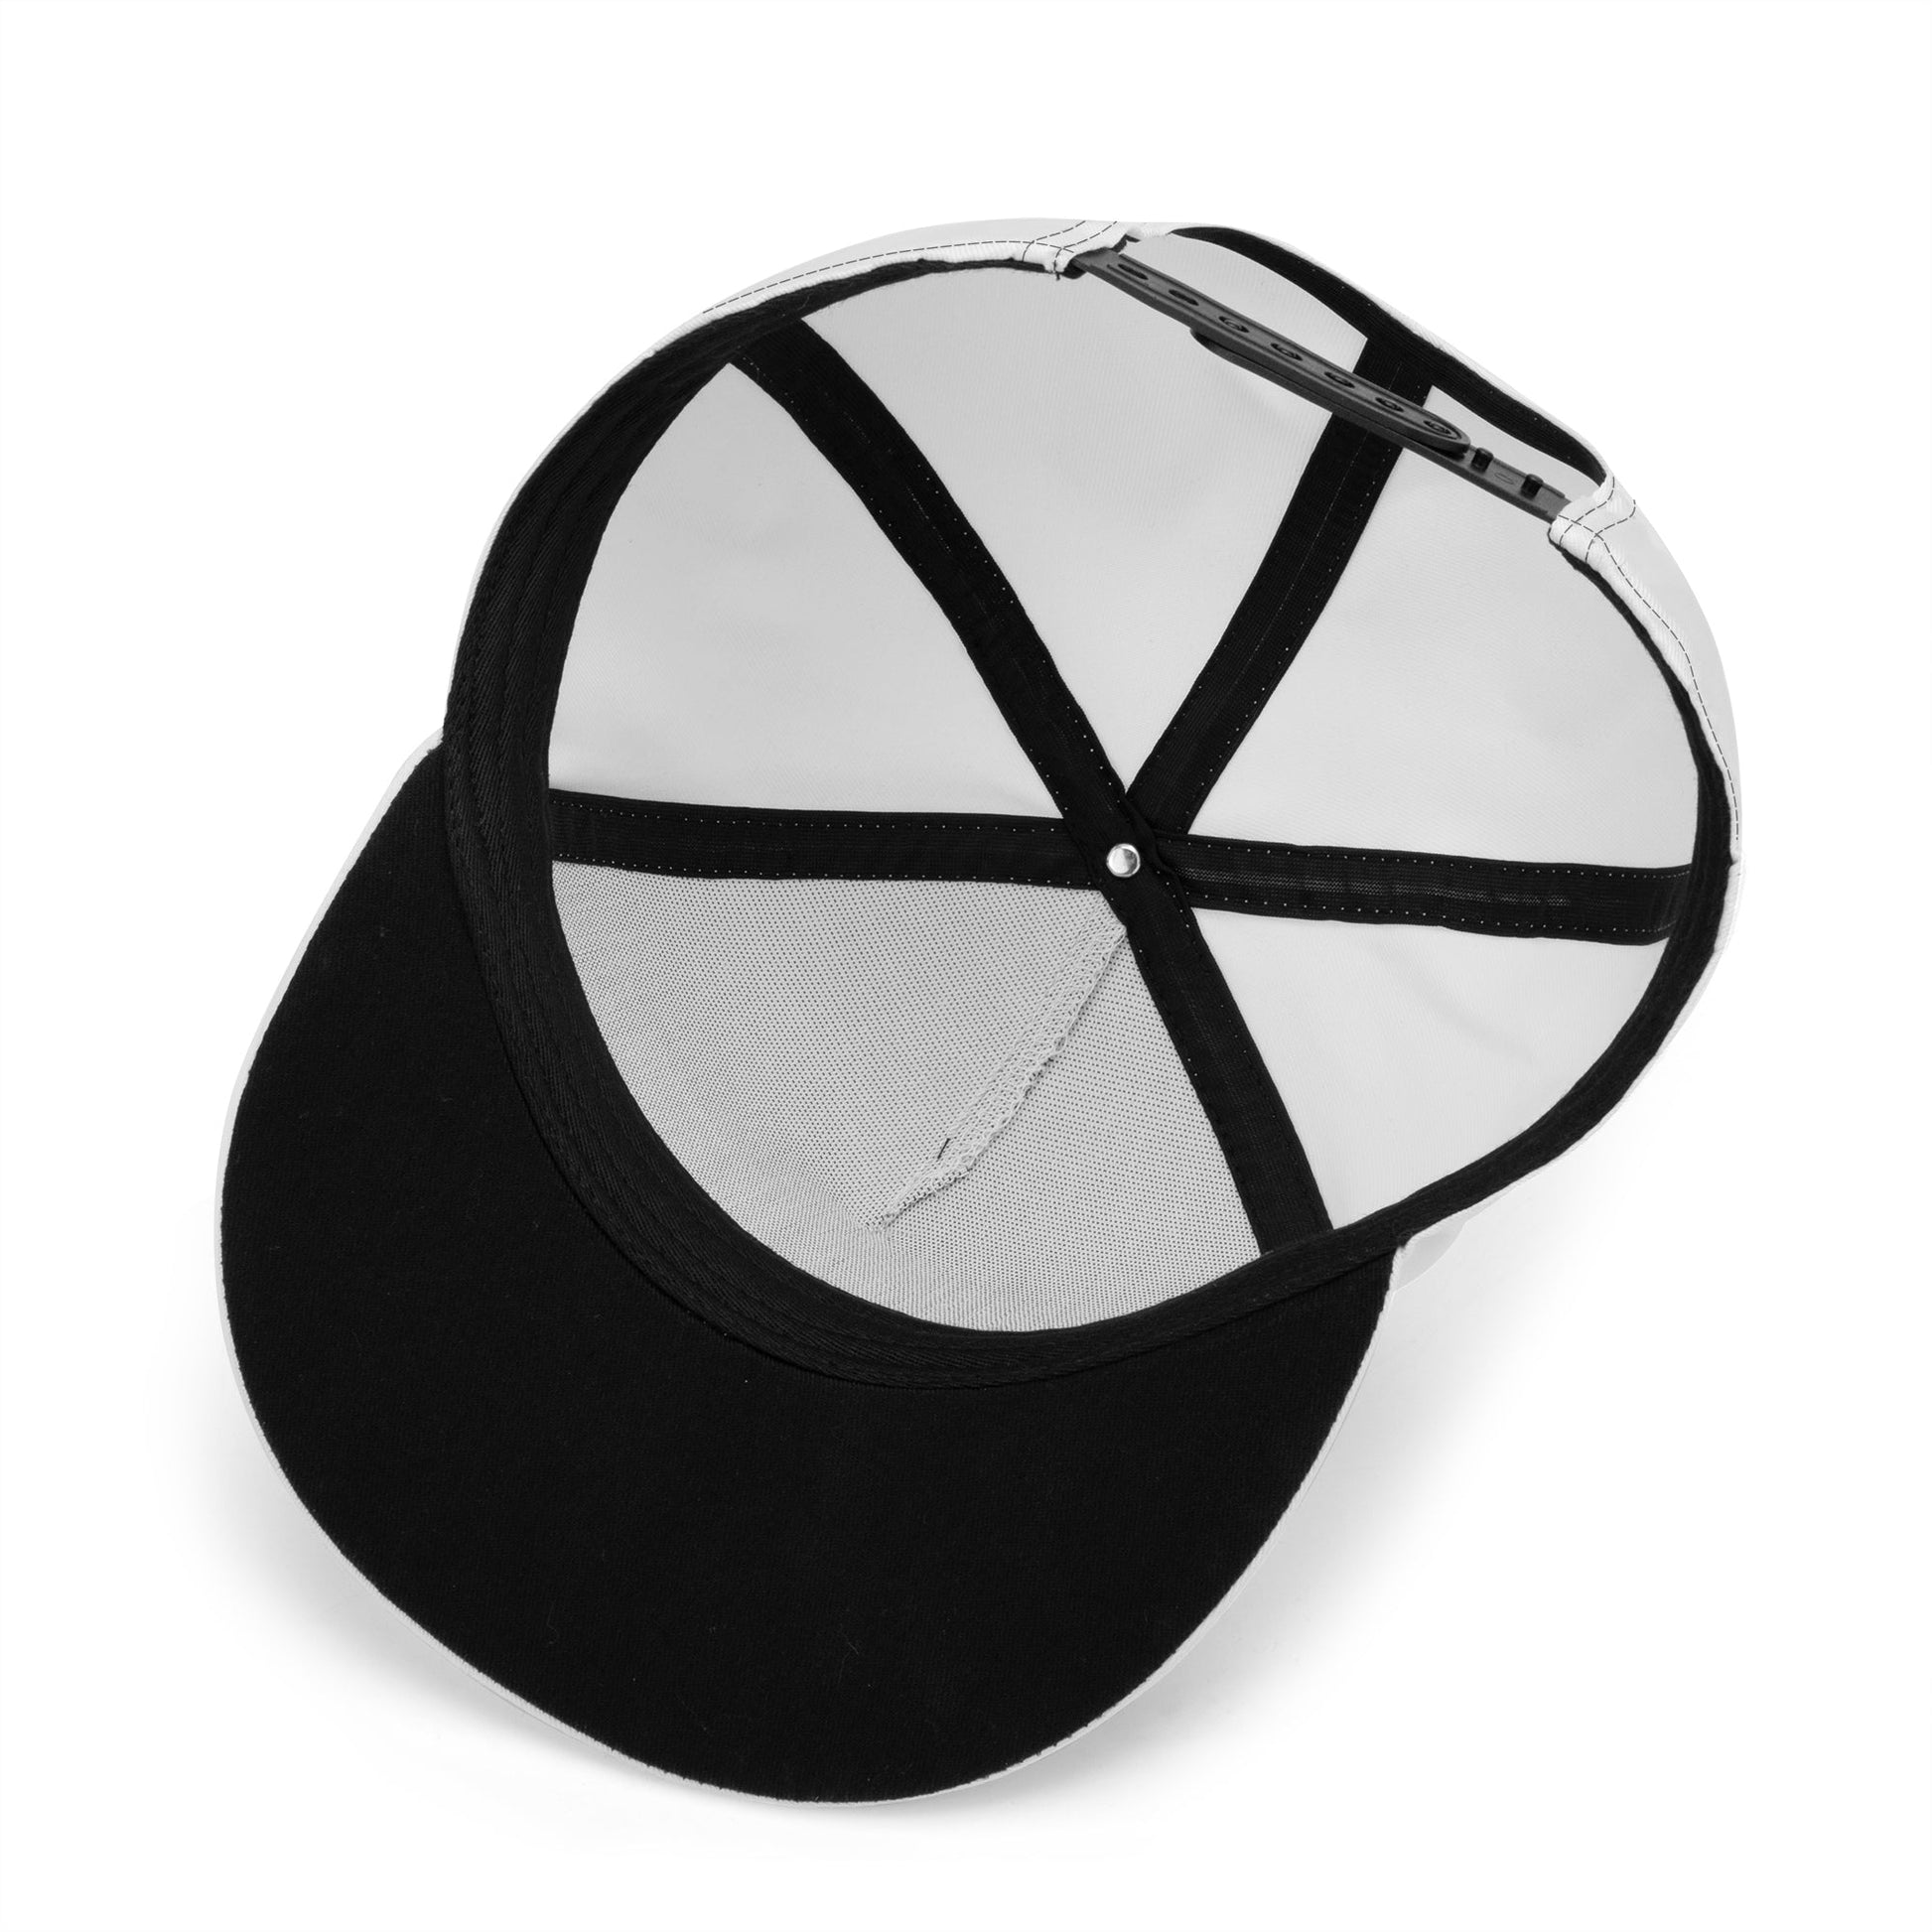 Stand out  with the  Tokyo Nugget Hip-hop Caps  available at Hey Nugget. Grab yours today!